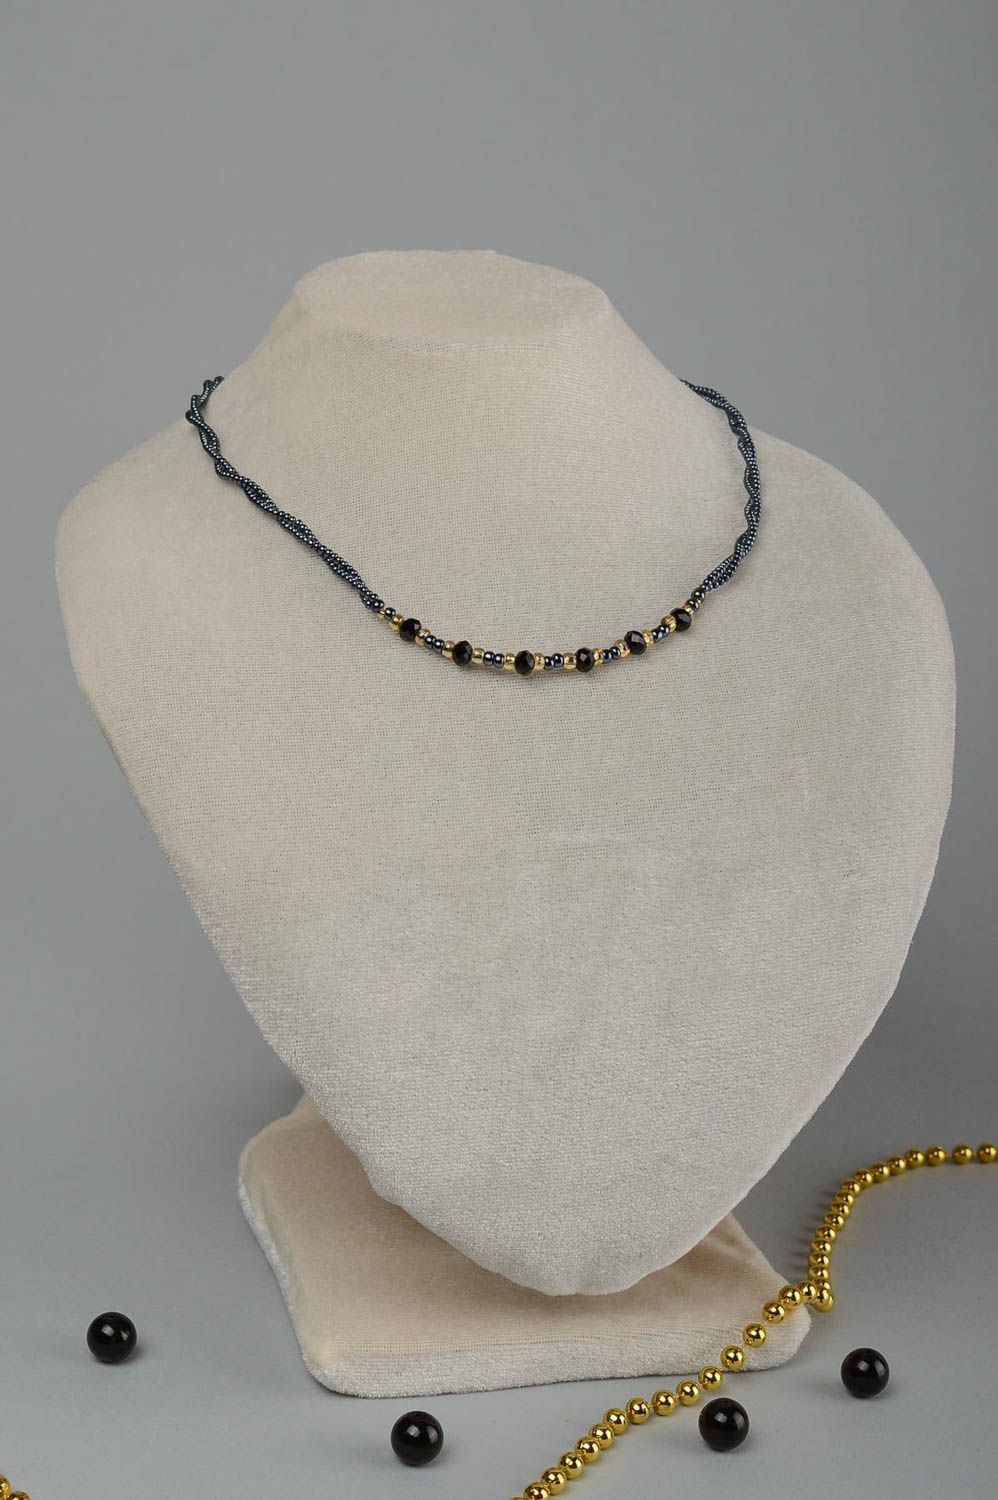 Beaded necklace handmade stylish jewelry for girls exclusive accessories photo 1